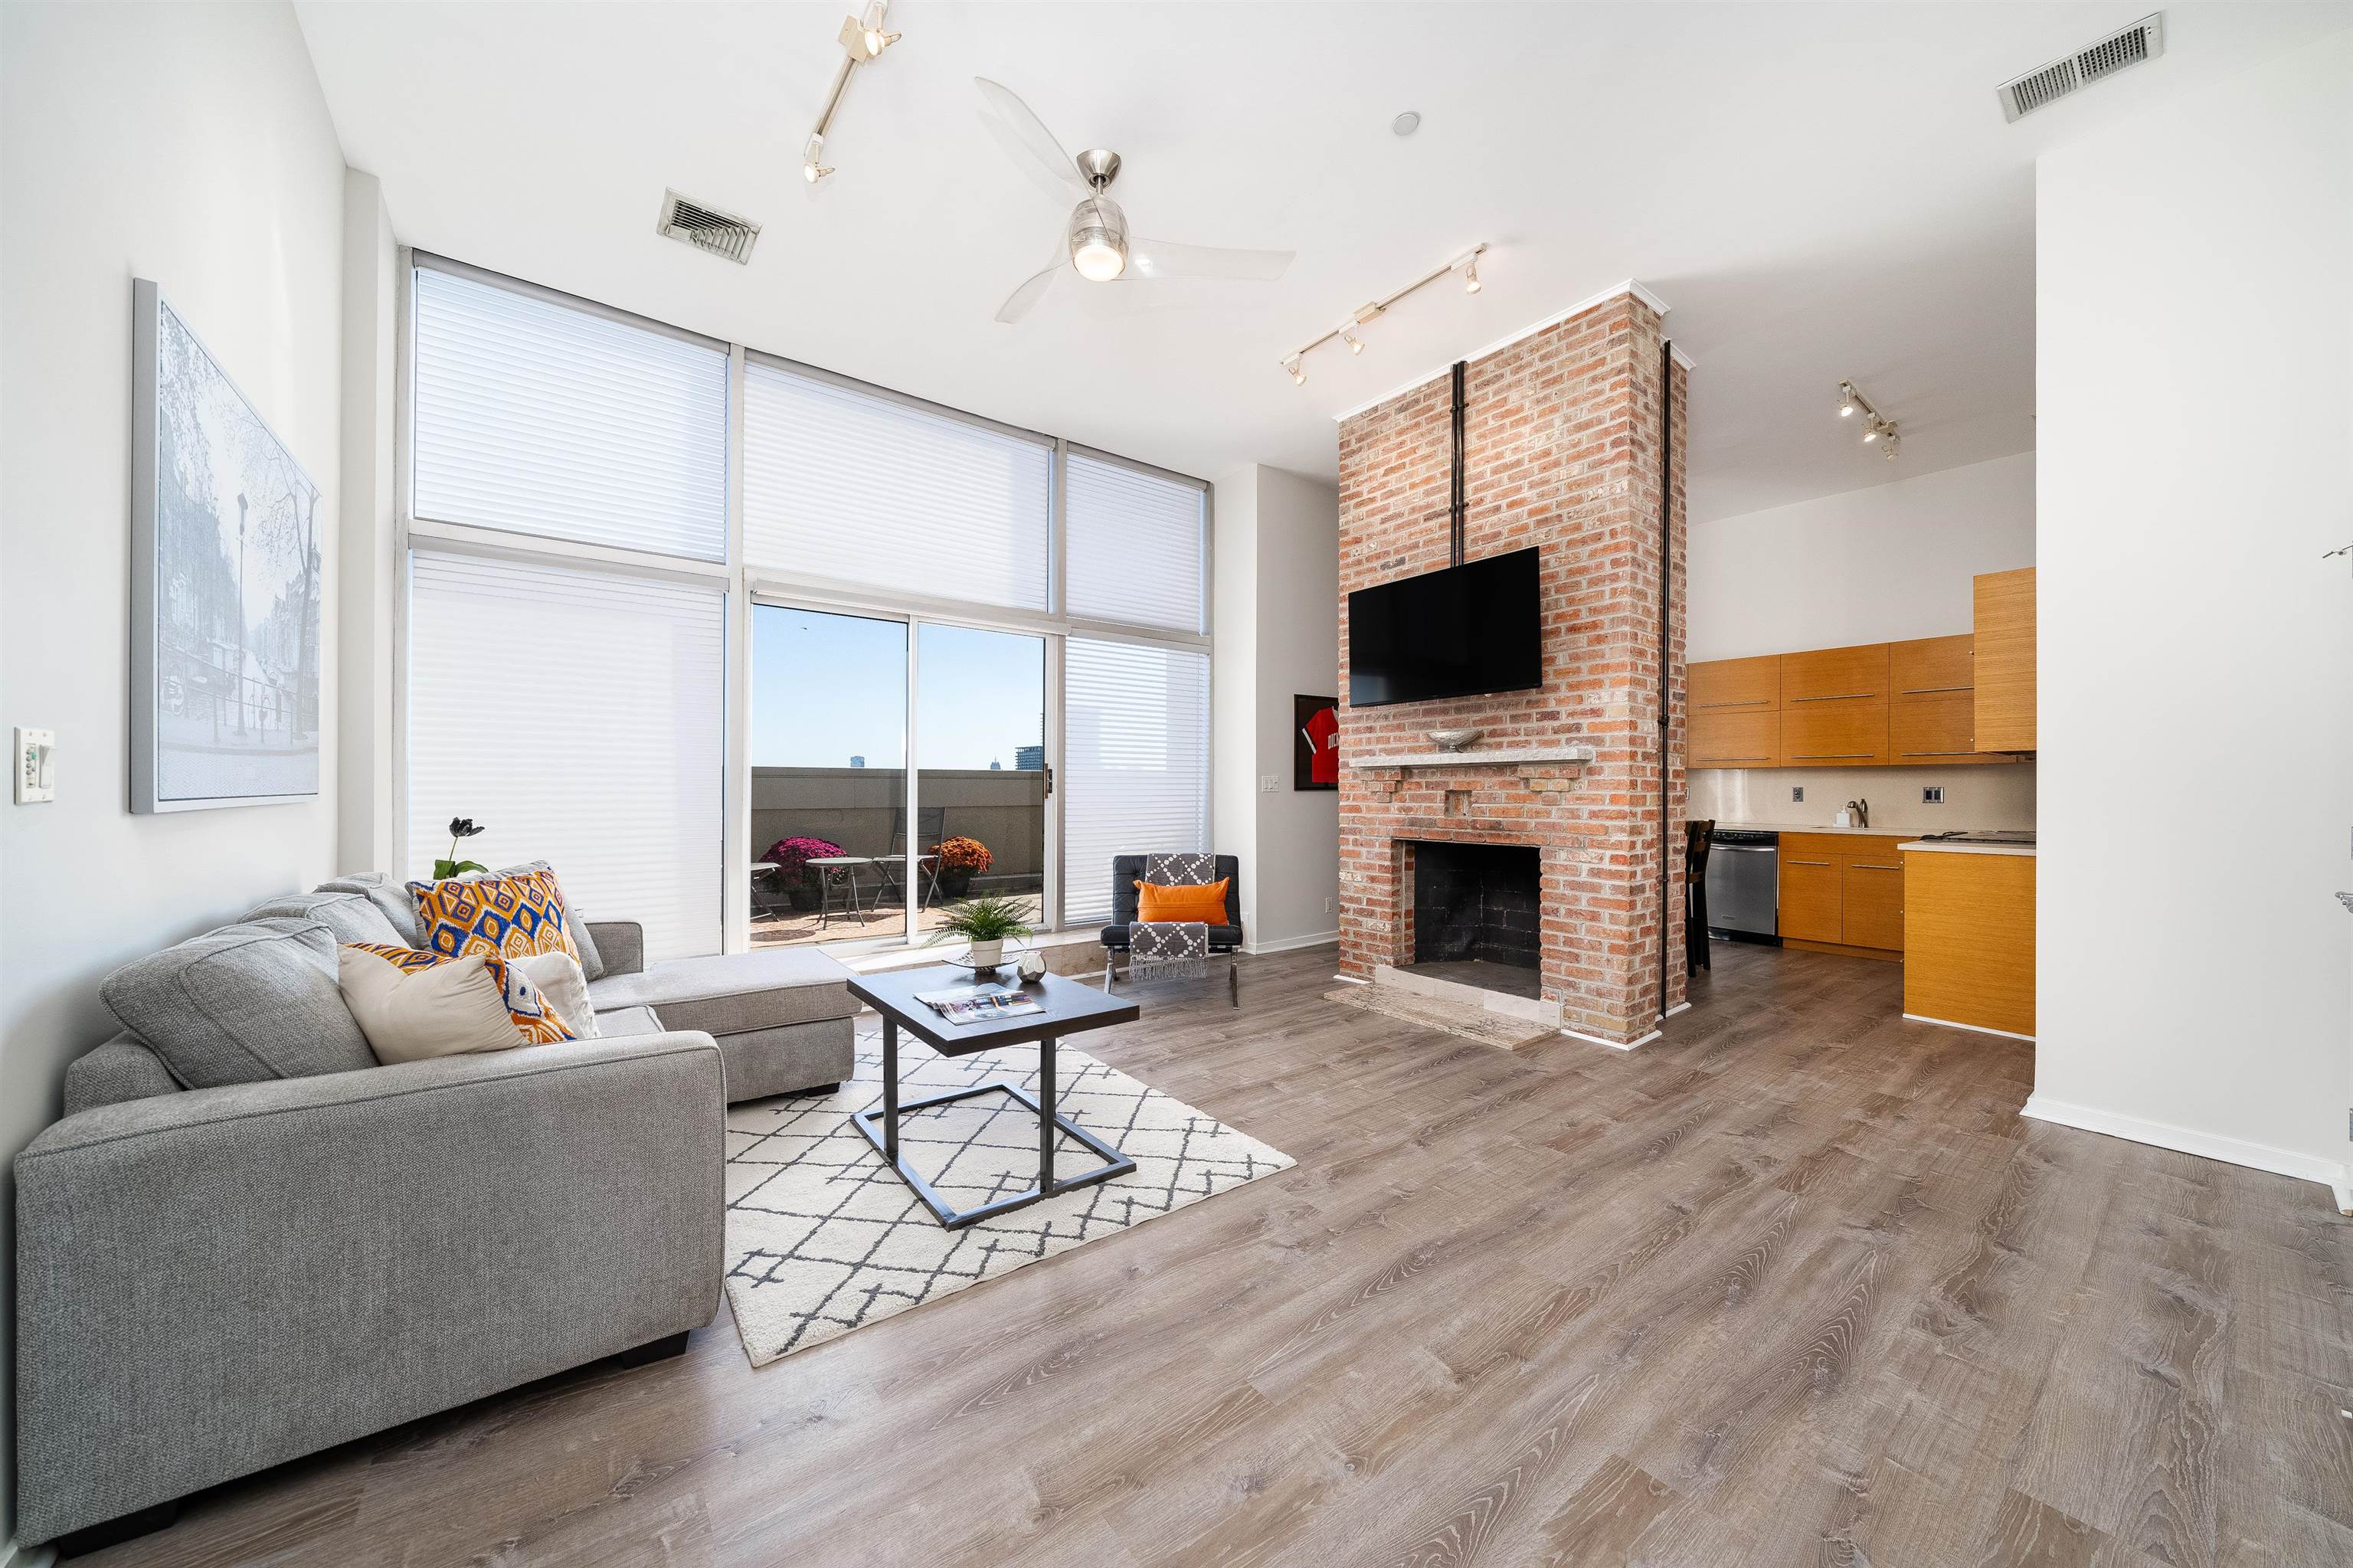 # 240005299 - For Rent in JERSEY CITY - Downtown NJ